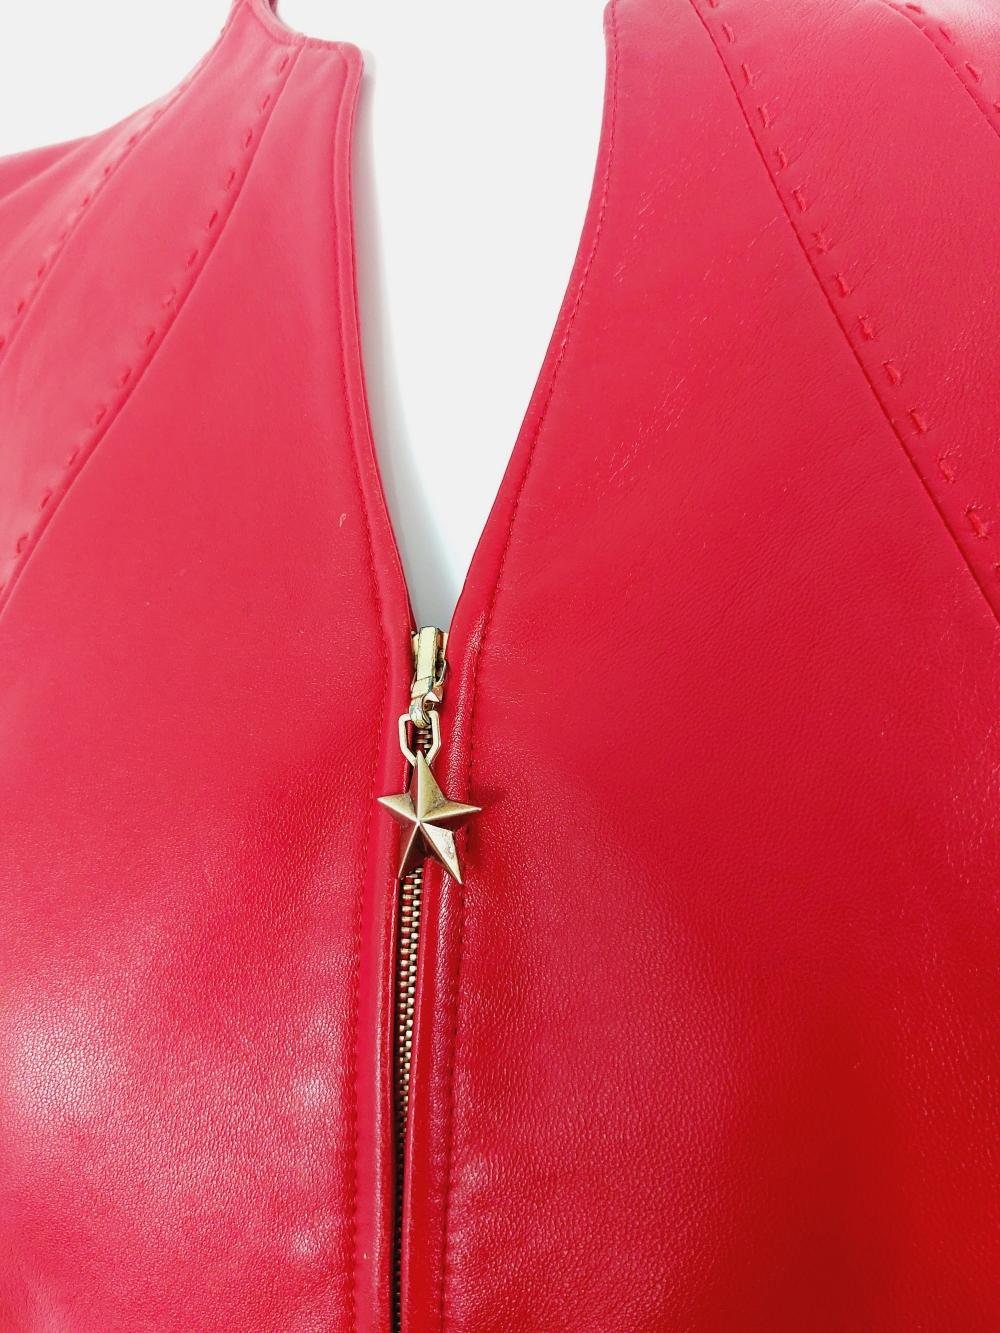 Thierry Mugler Couture Red Leather Lamb Runway Wasp Waist Motorcycle 90s Jacket 2